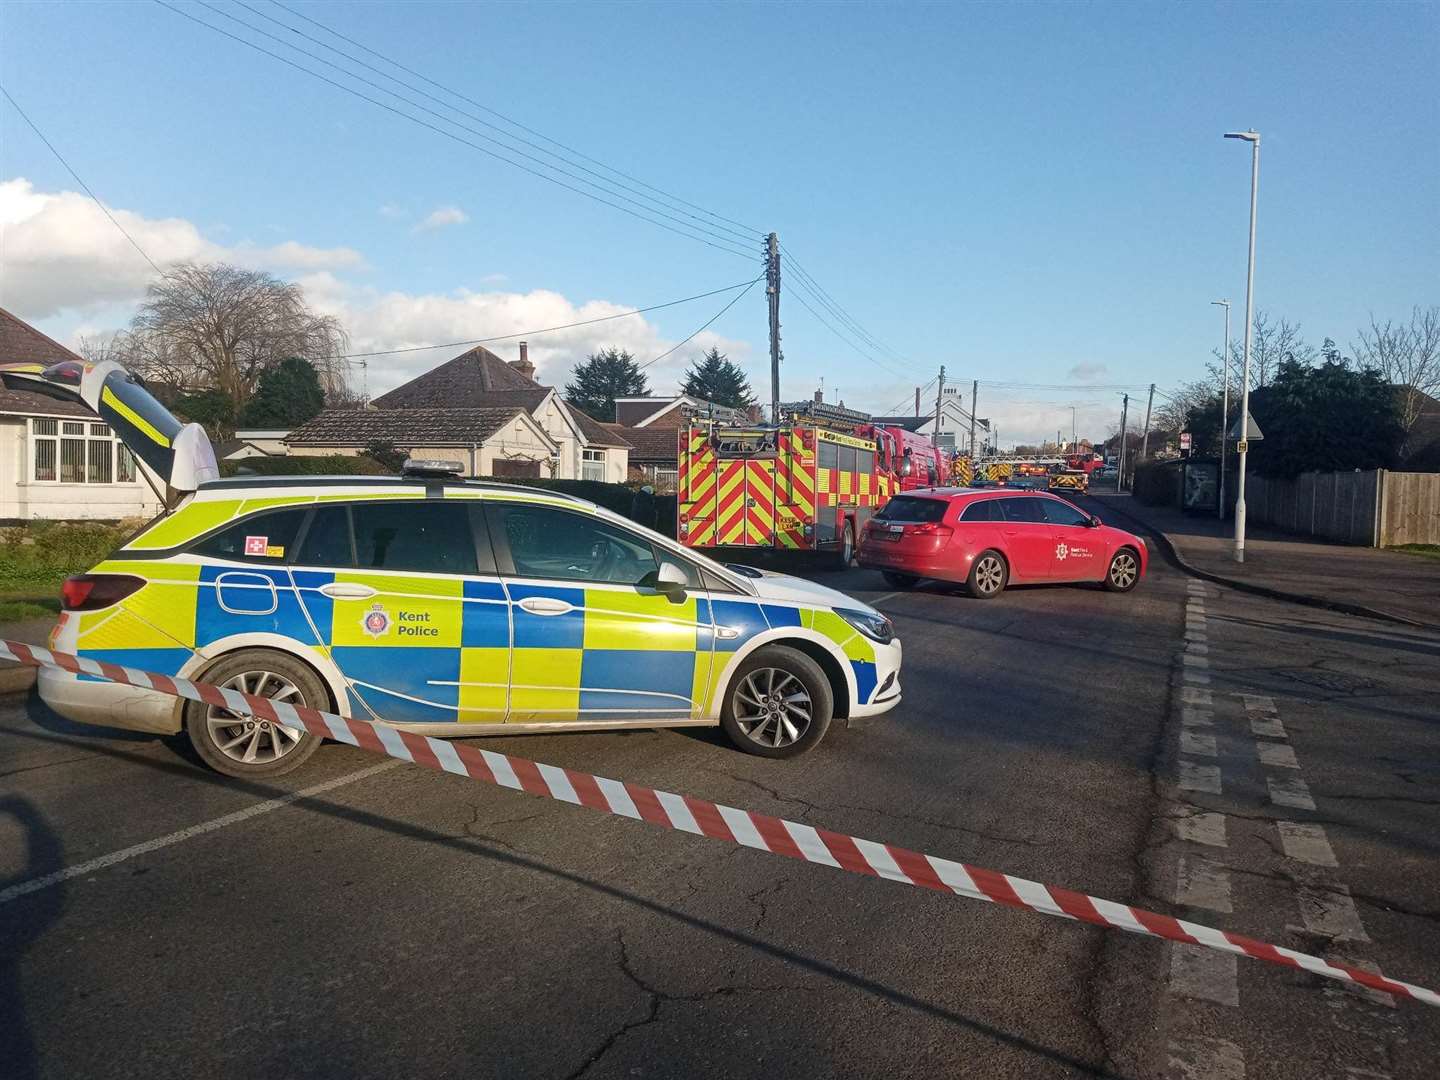 Minster Road on the Isle of Sheppey was closed while a turntable ladder from Kent Fire and Rescue was used during a medical incident. Picture: Steve Harding